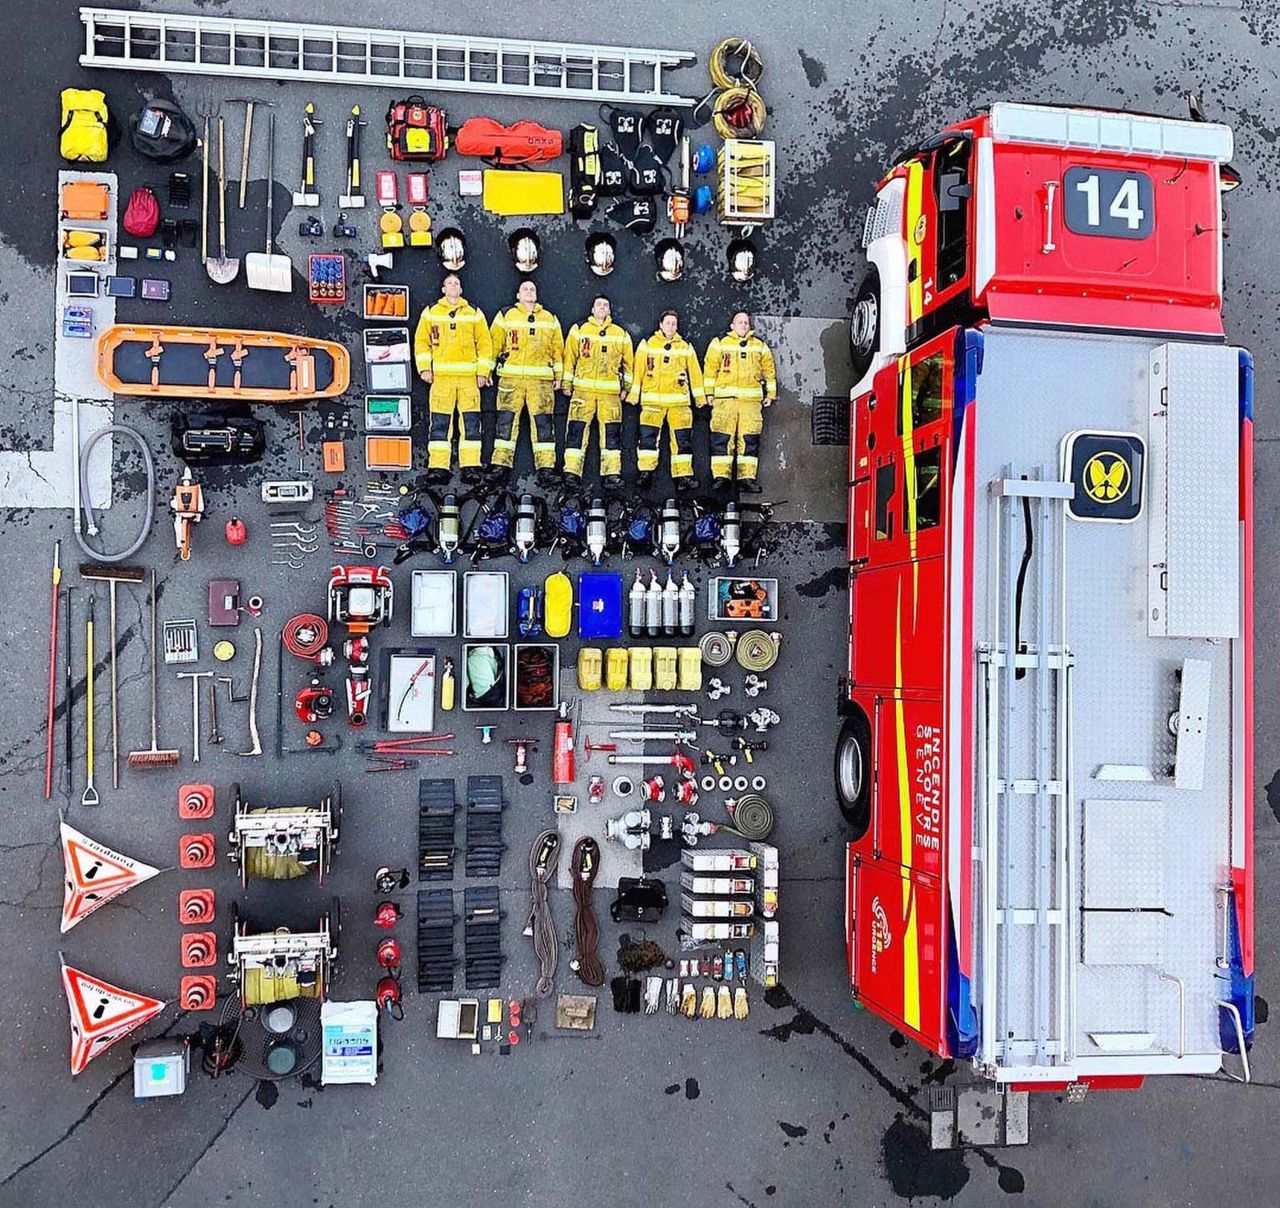 The Geneva Fire and Rescue Service in Switzerland shared a photo showcasing its fire truck and the crew and equipment it carries.